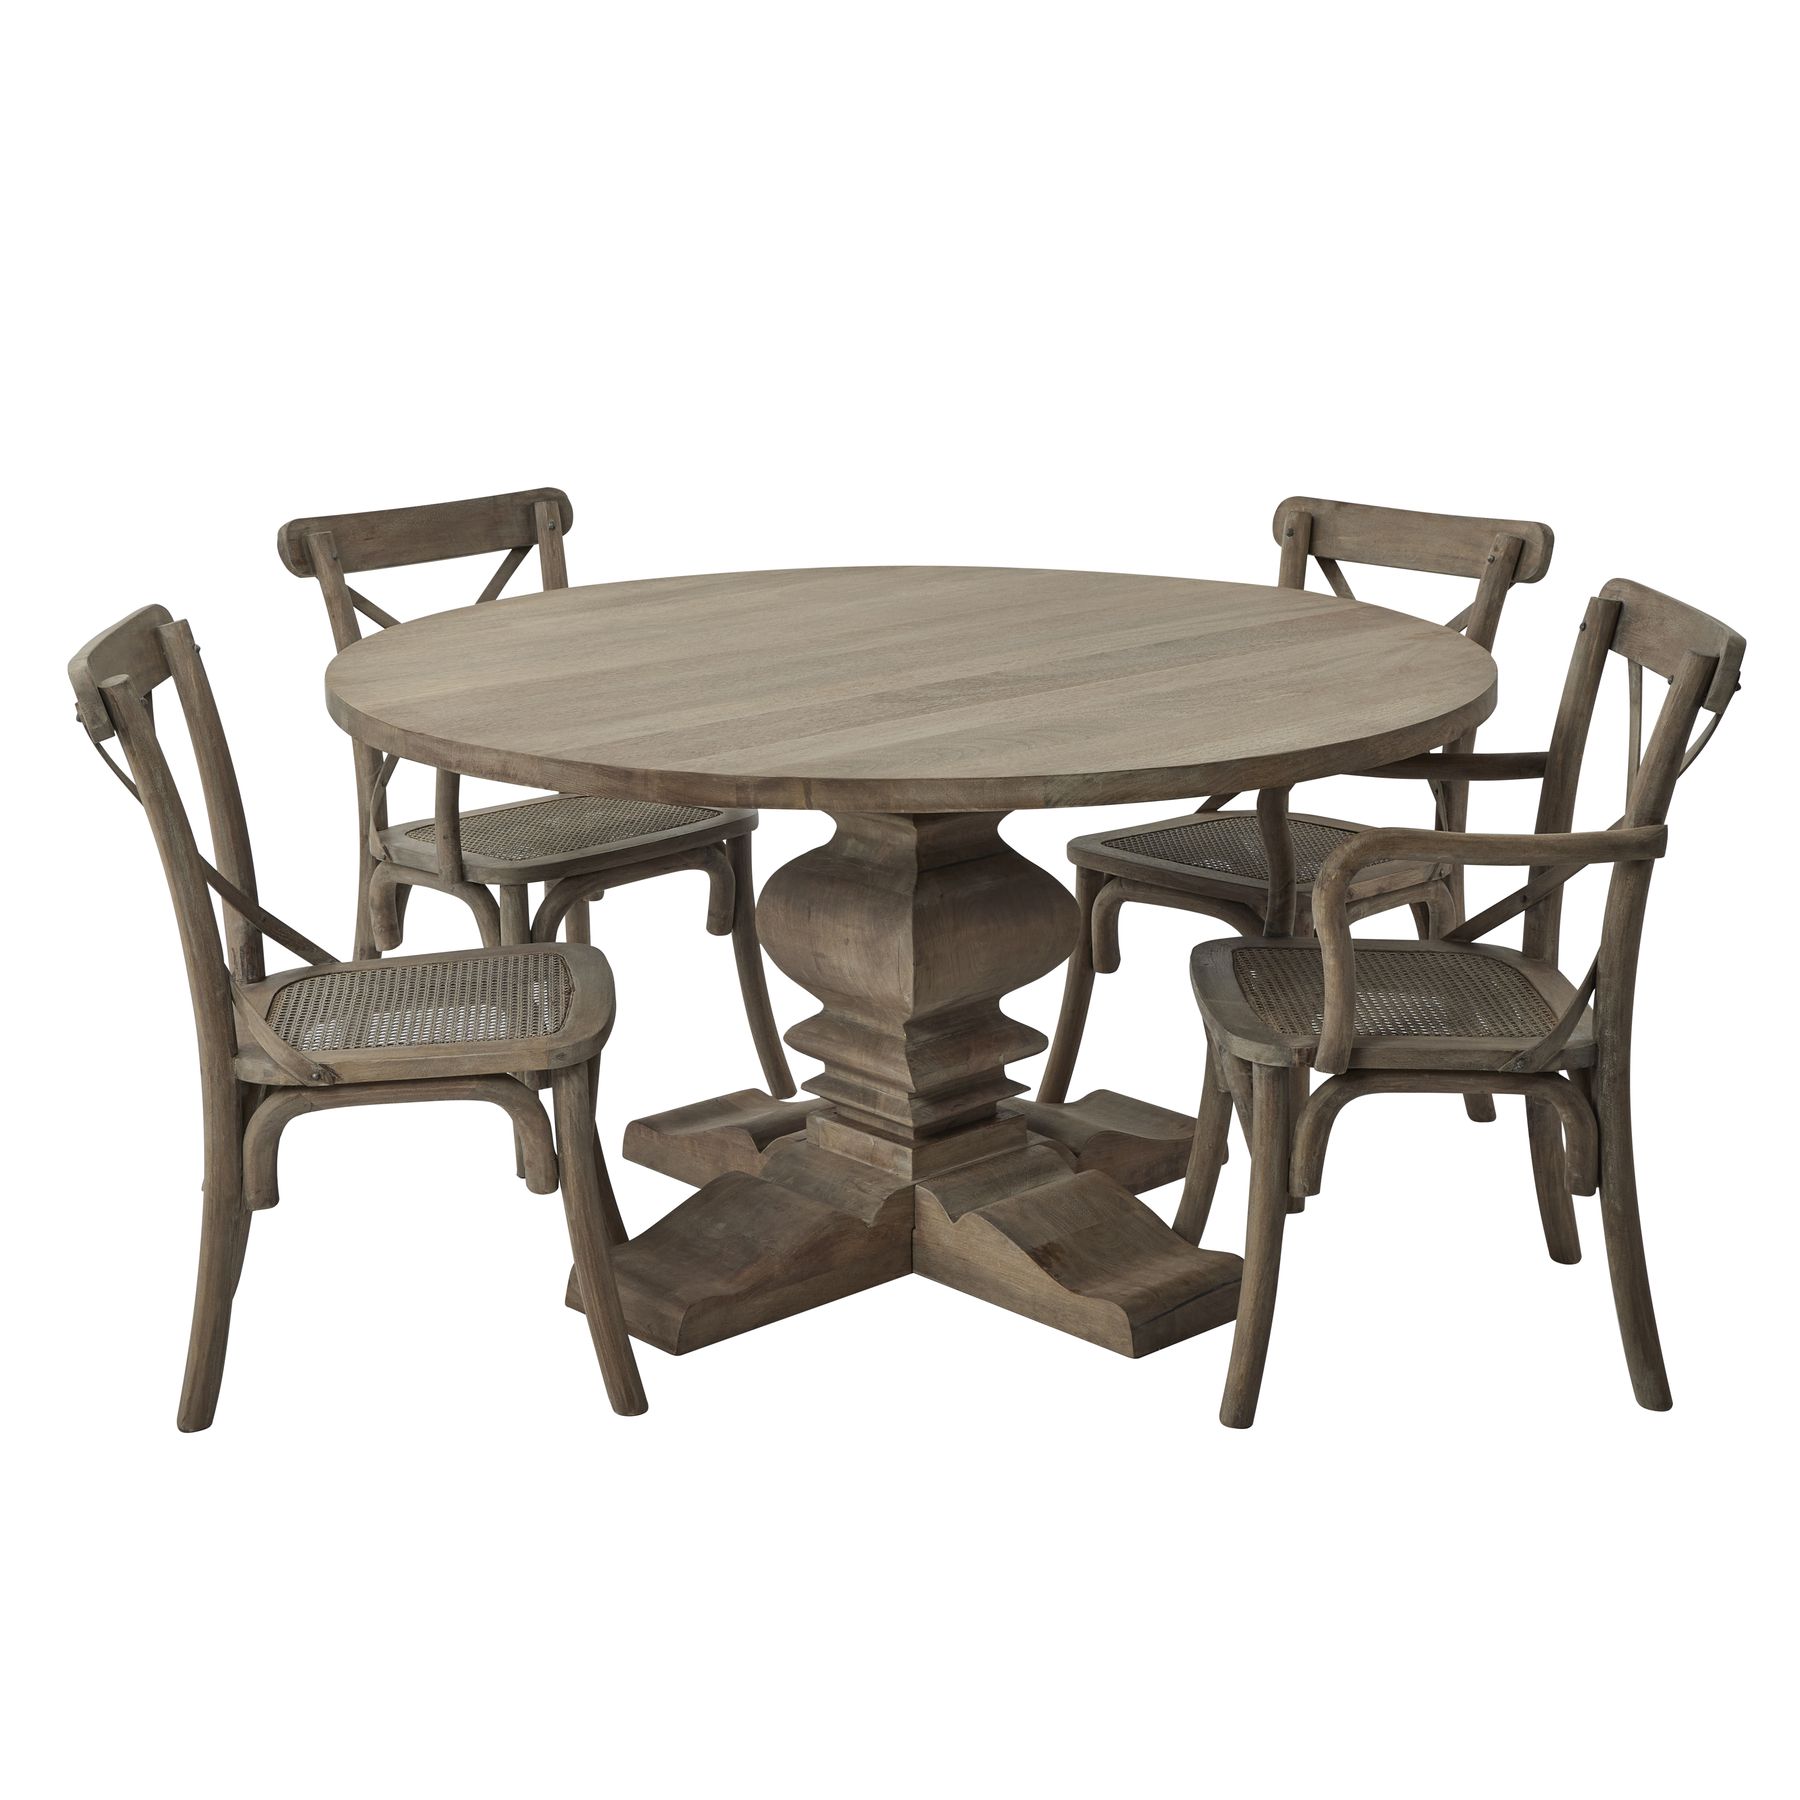 Copgrove Collection Round Pedestal Dining Table - Image 4